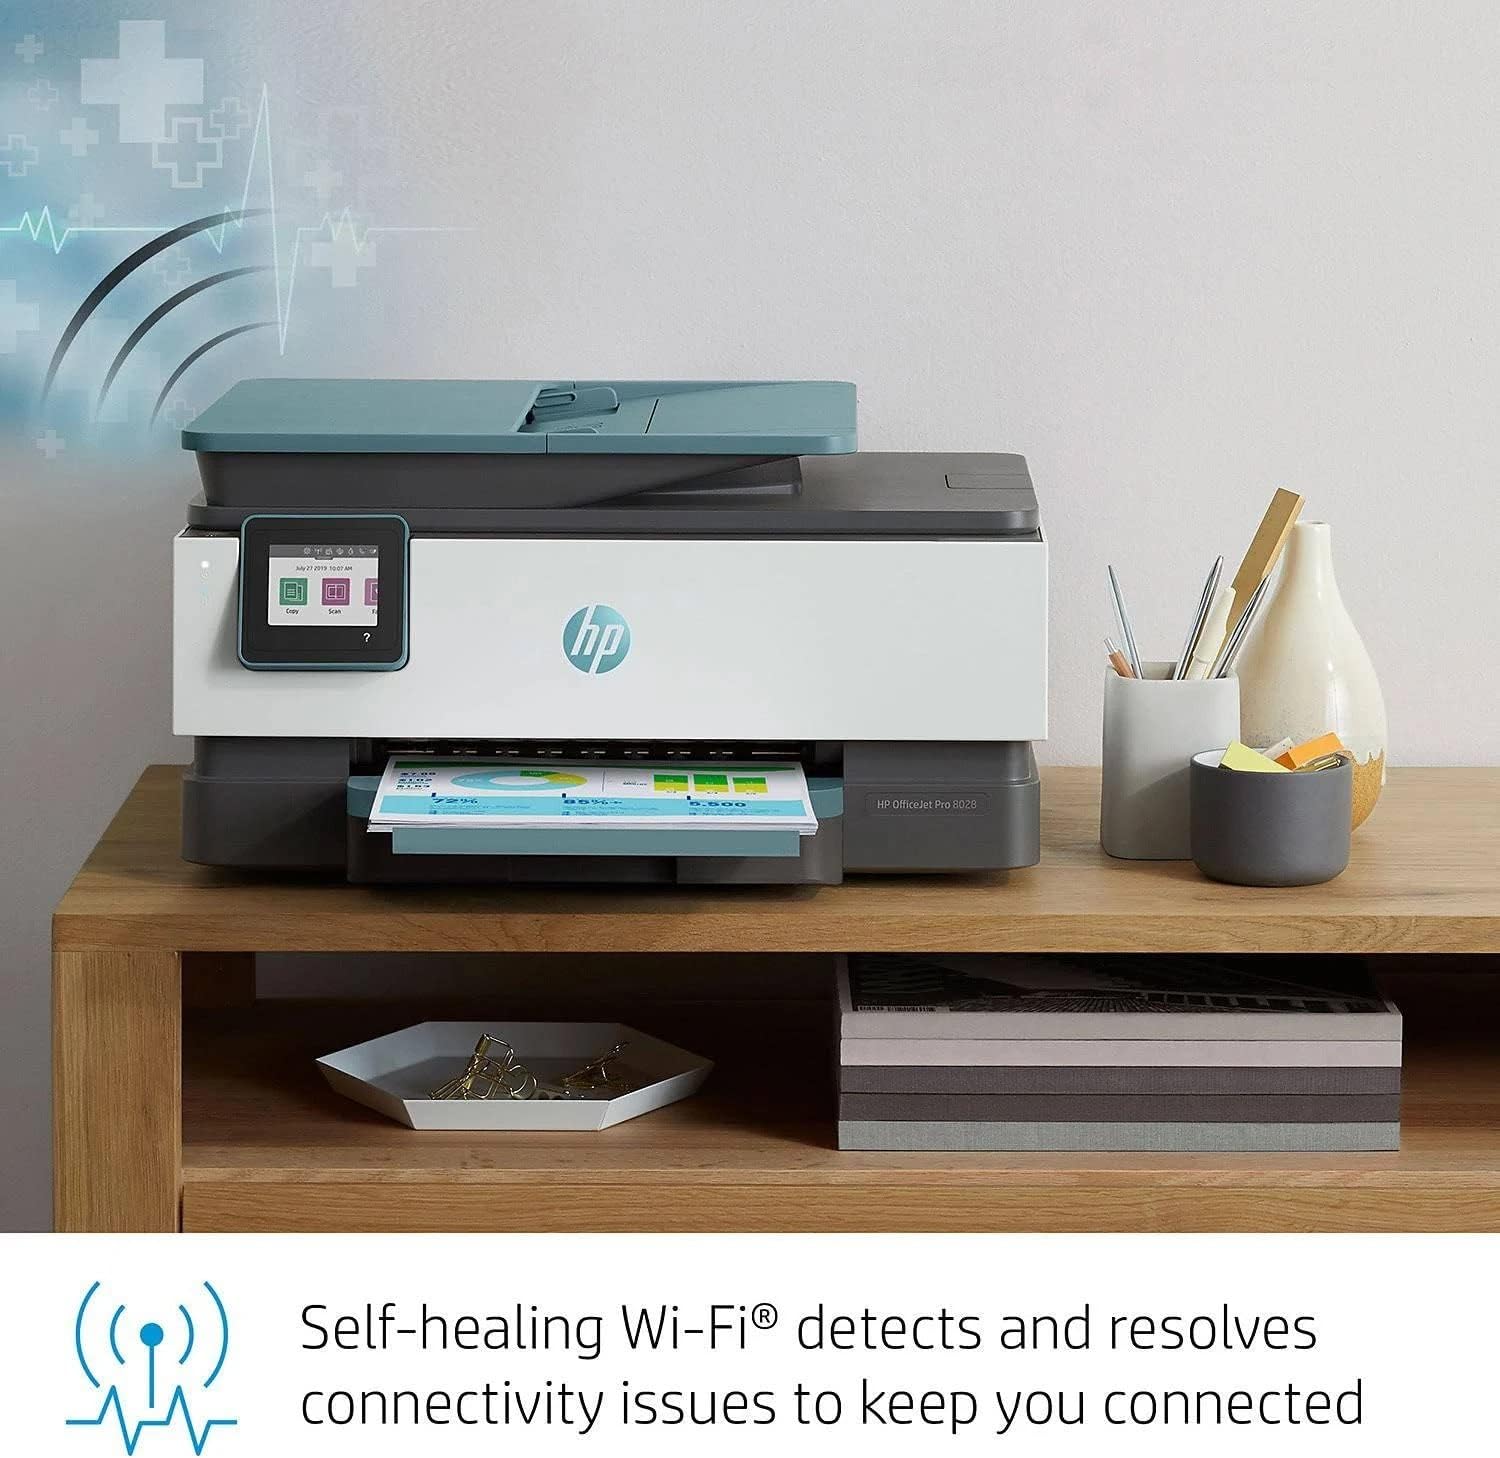 Critique of HP Officejet Pro 8028 All-in-One Printer Wireless Printer, 3UC64A (Renewed)